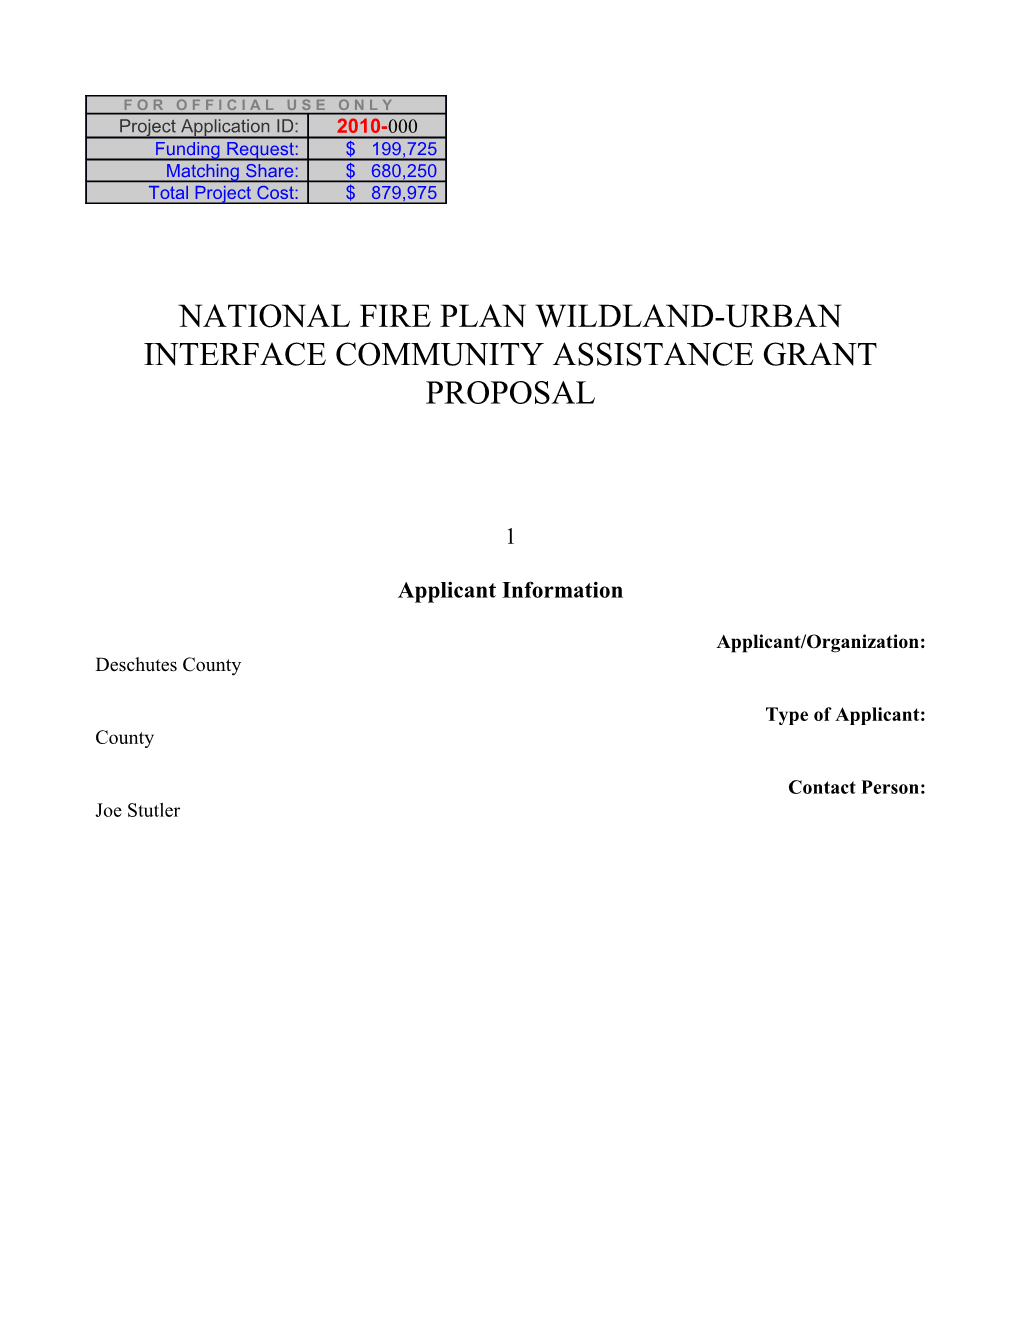 National Fire Plan Wildland-Urban Interface Community Assistance Grant Proposal